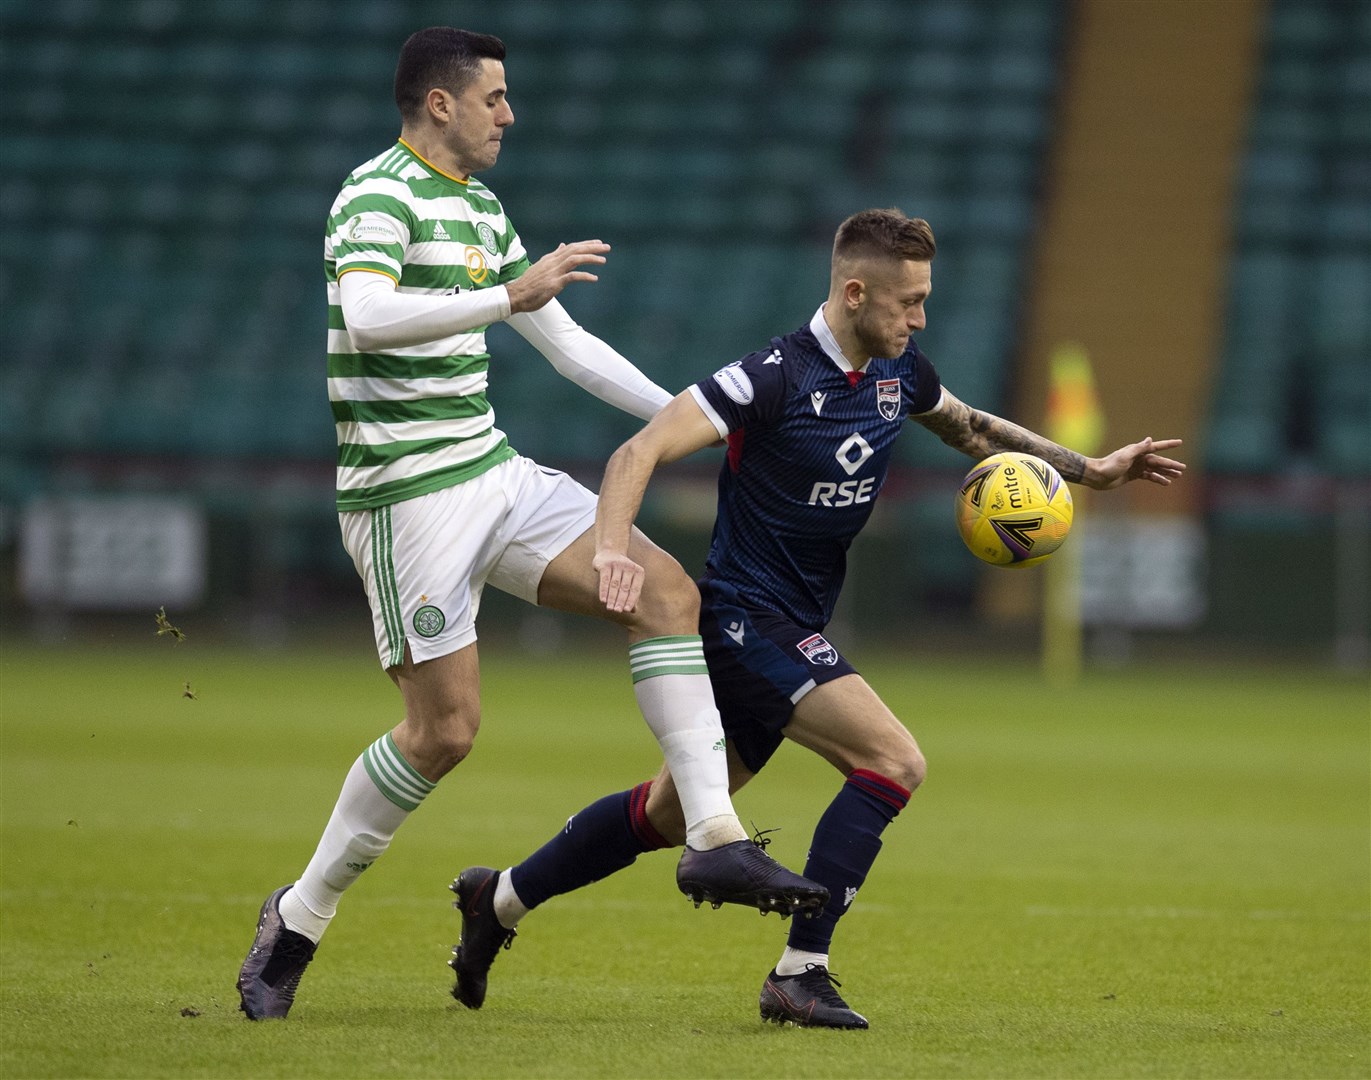 Picture - Ken Macpherson, Inverness. Scottish League Cup 2nd Round. Celtic(0) v Ross County(2). 29.11.20. Ross County's Charlie Lakin gets away from Celtic’s Tom Rogic.